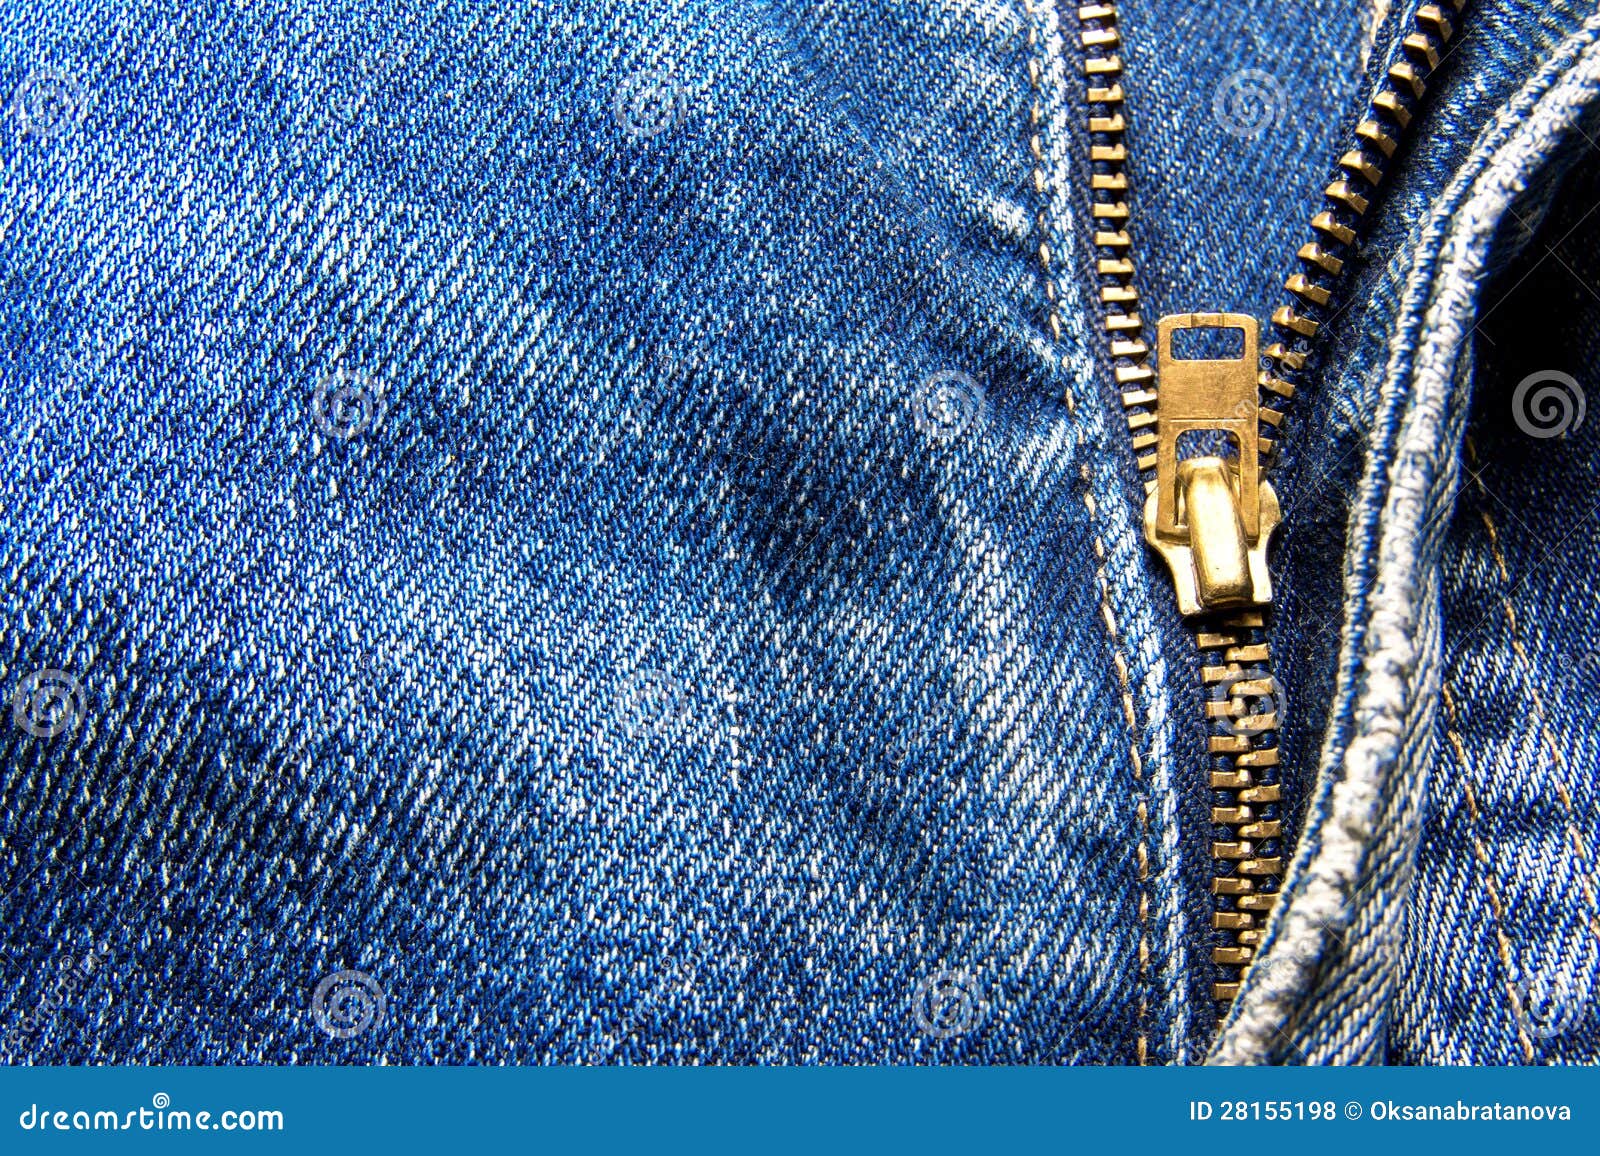 Jeans zipper stock photo. Image of navy, cotton, clothing - 28155198